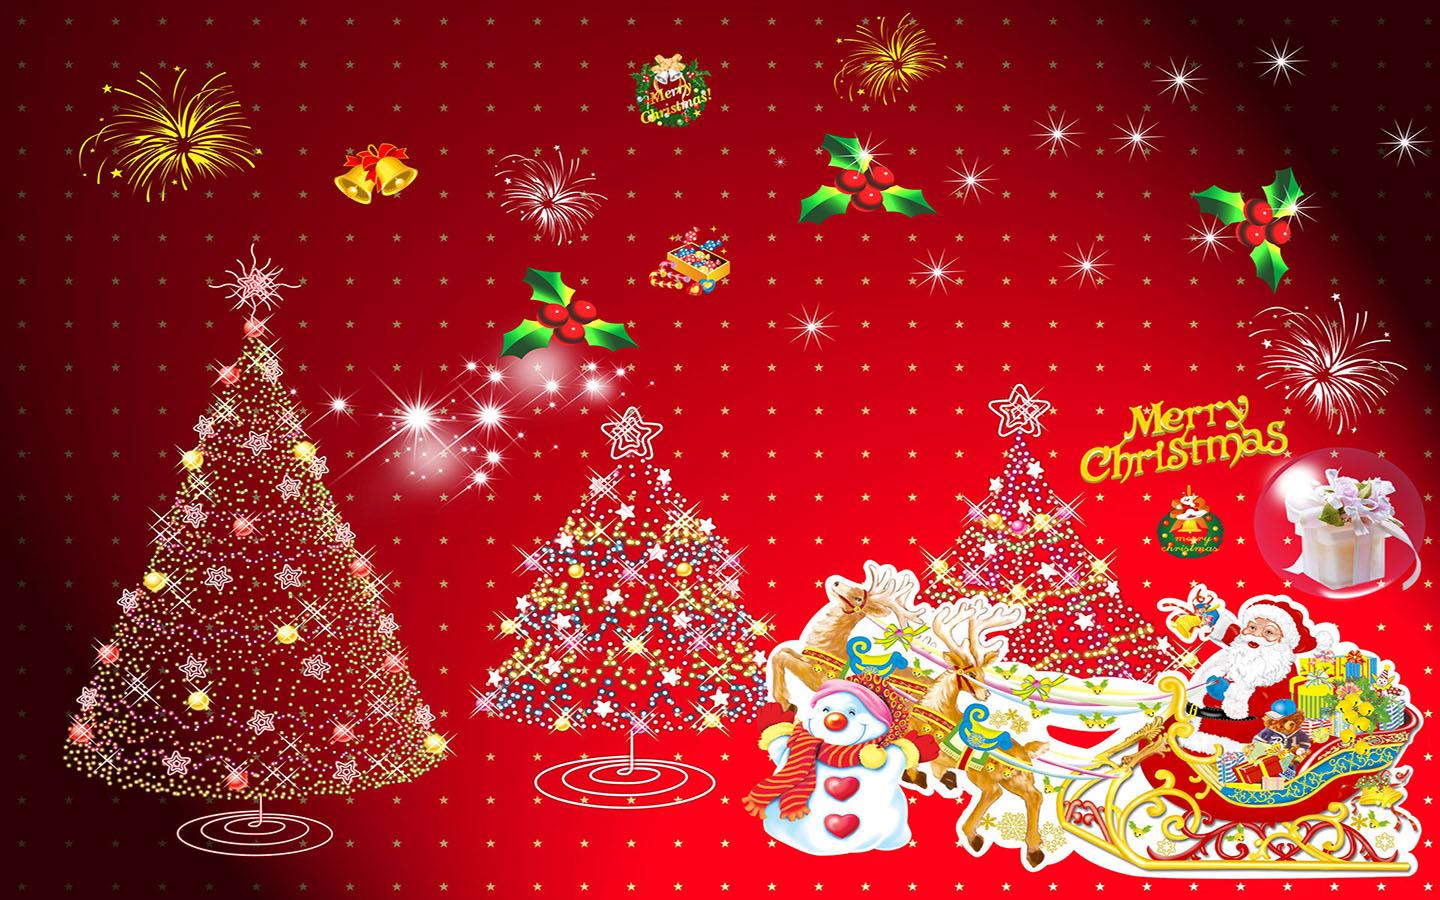 Merry Christmas wallpaper - Android Apps on Google Play